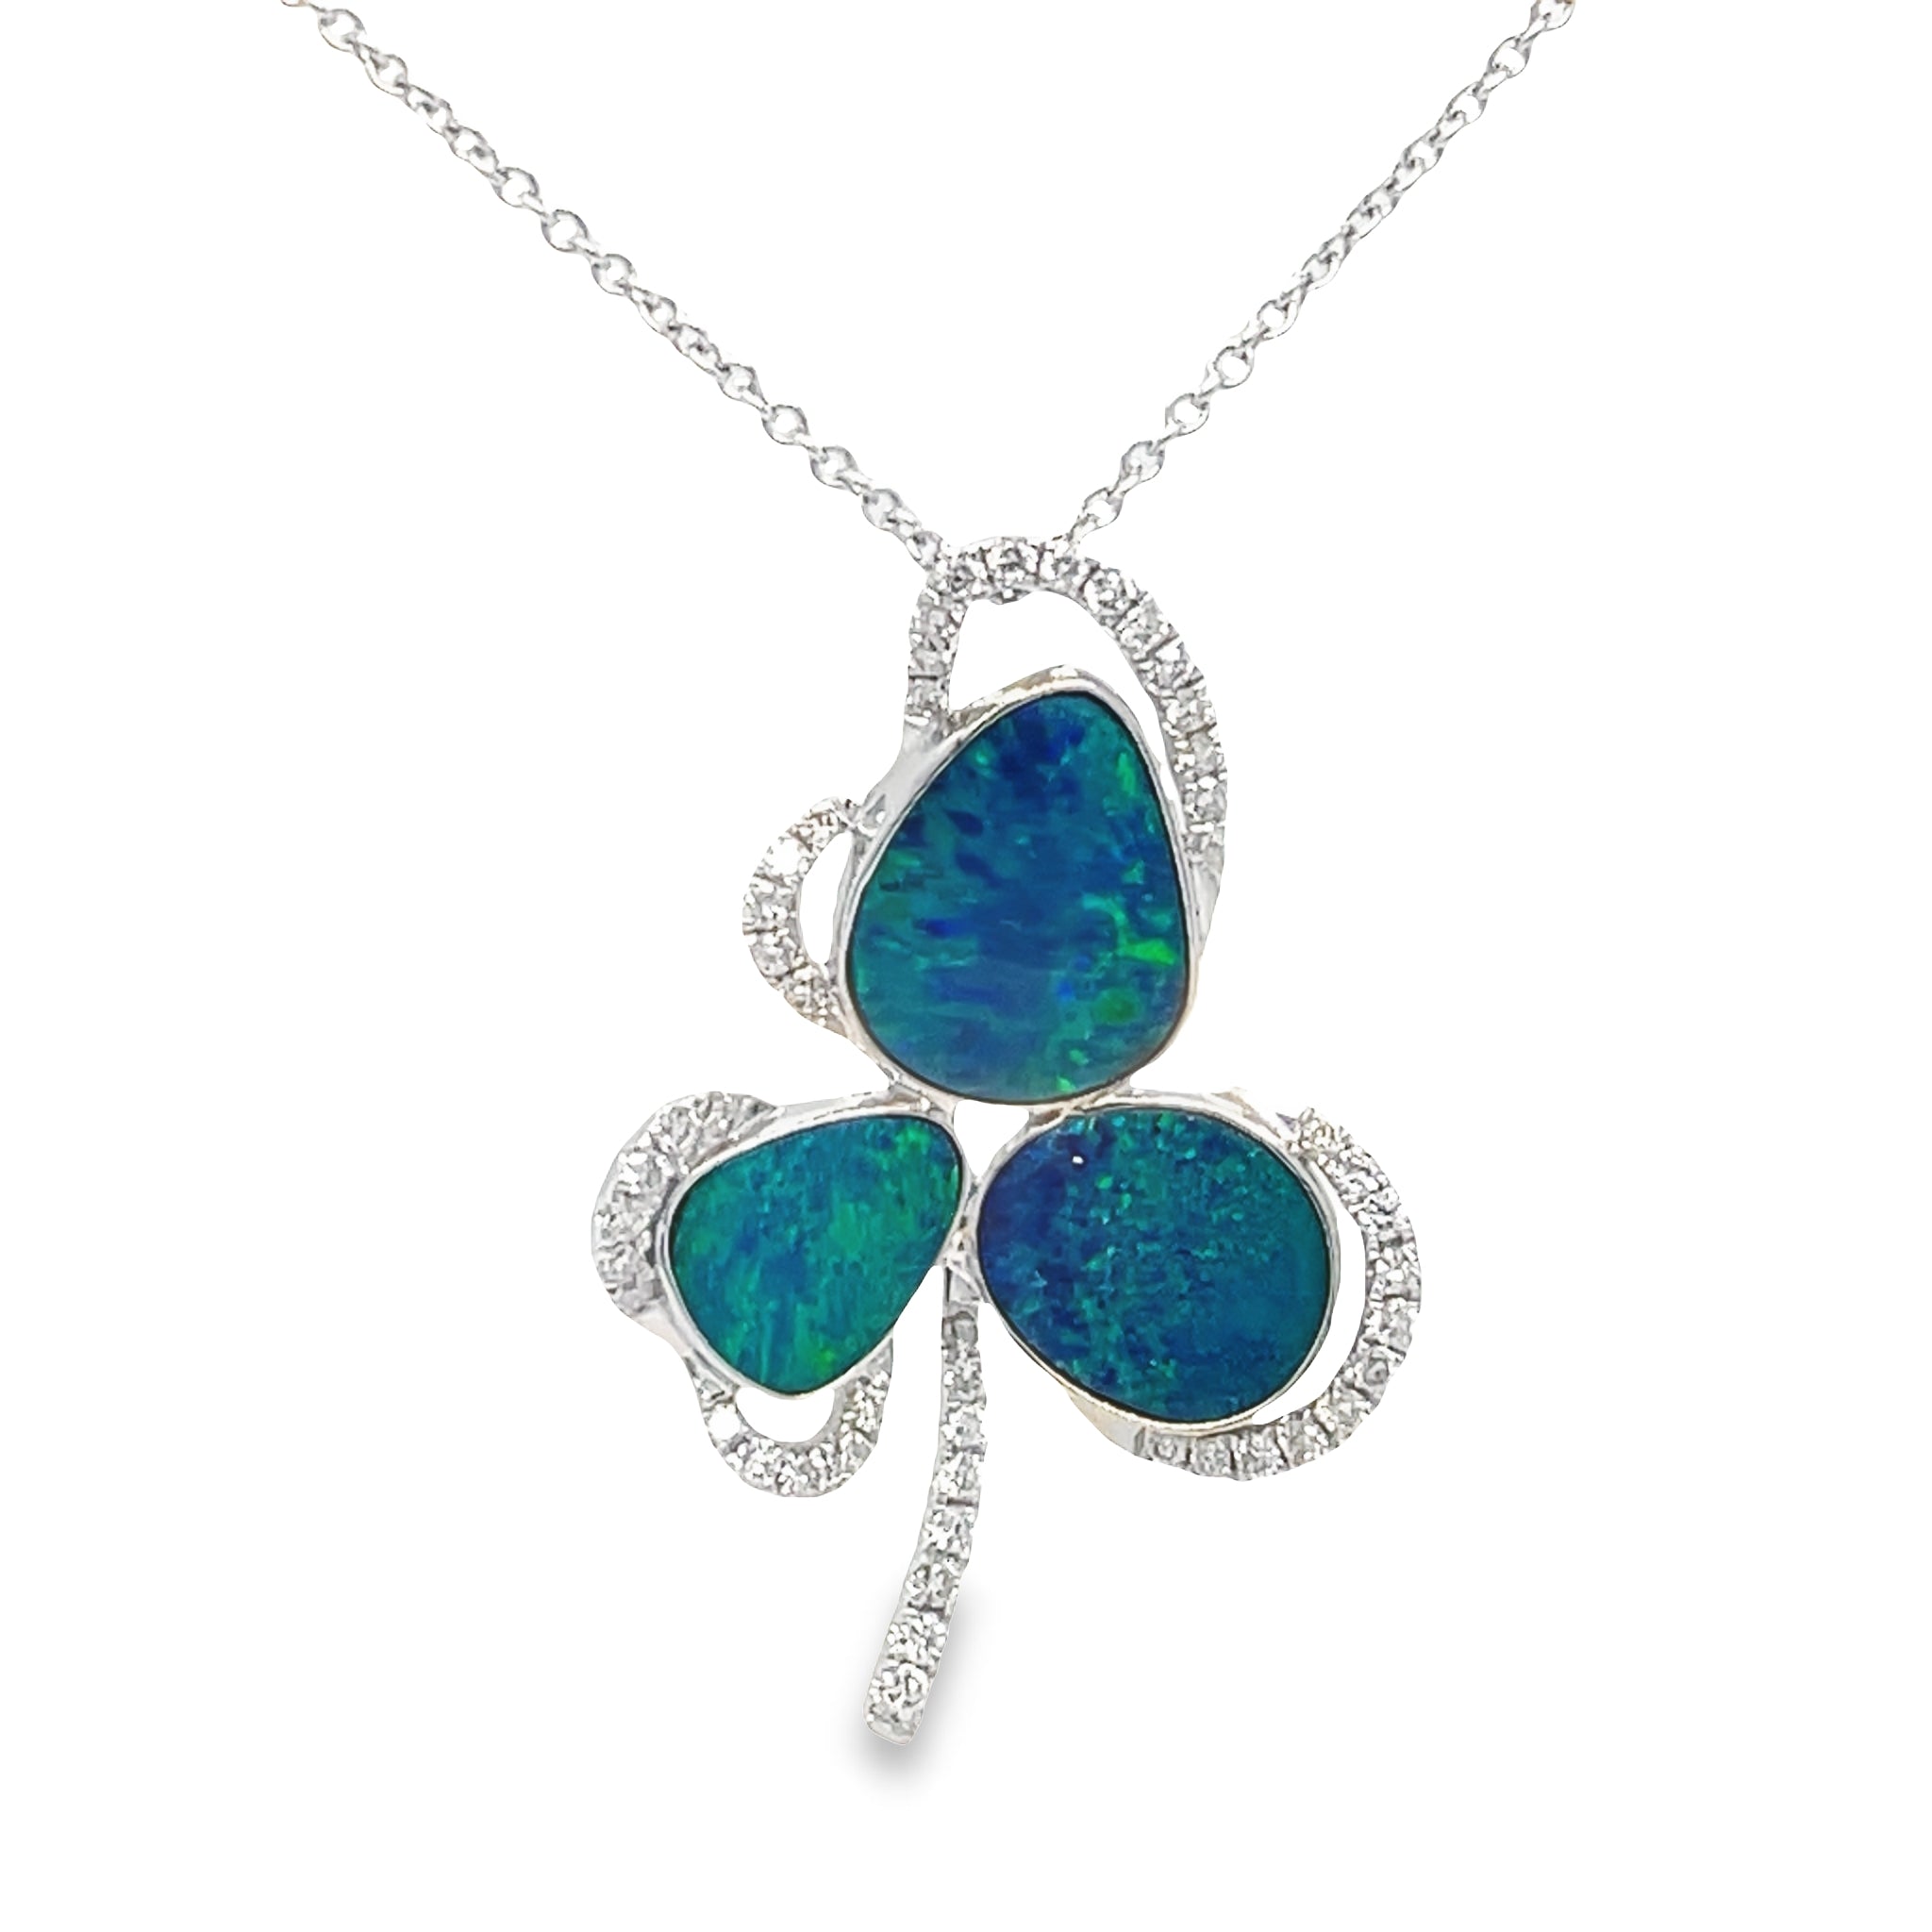 Sparkle and shine with this stunning 14k white gold pendant necklace featuring a dazzling three leaf black Australian opal and round diamond accents. This eye-catching pendant contains 4.55 carats of black opal and 0.41 carats of round diamonds for a true statement of elegance and style.  22.00 x 30.00 mm 